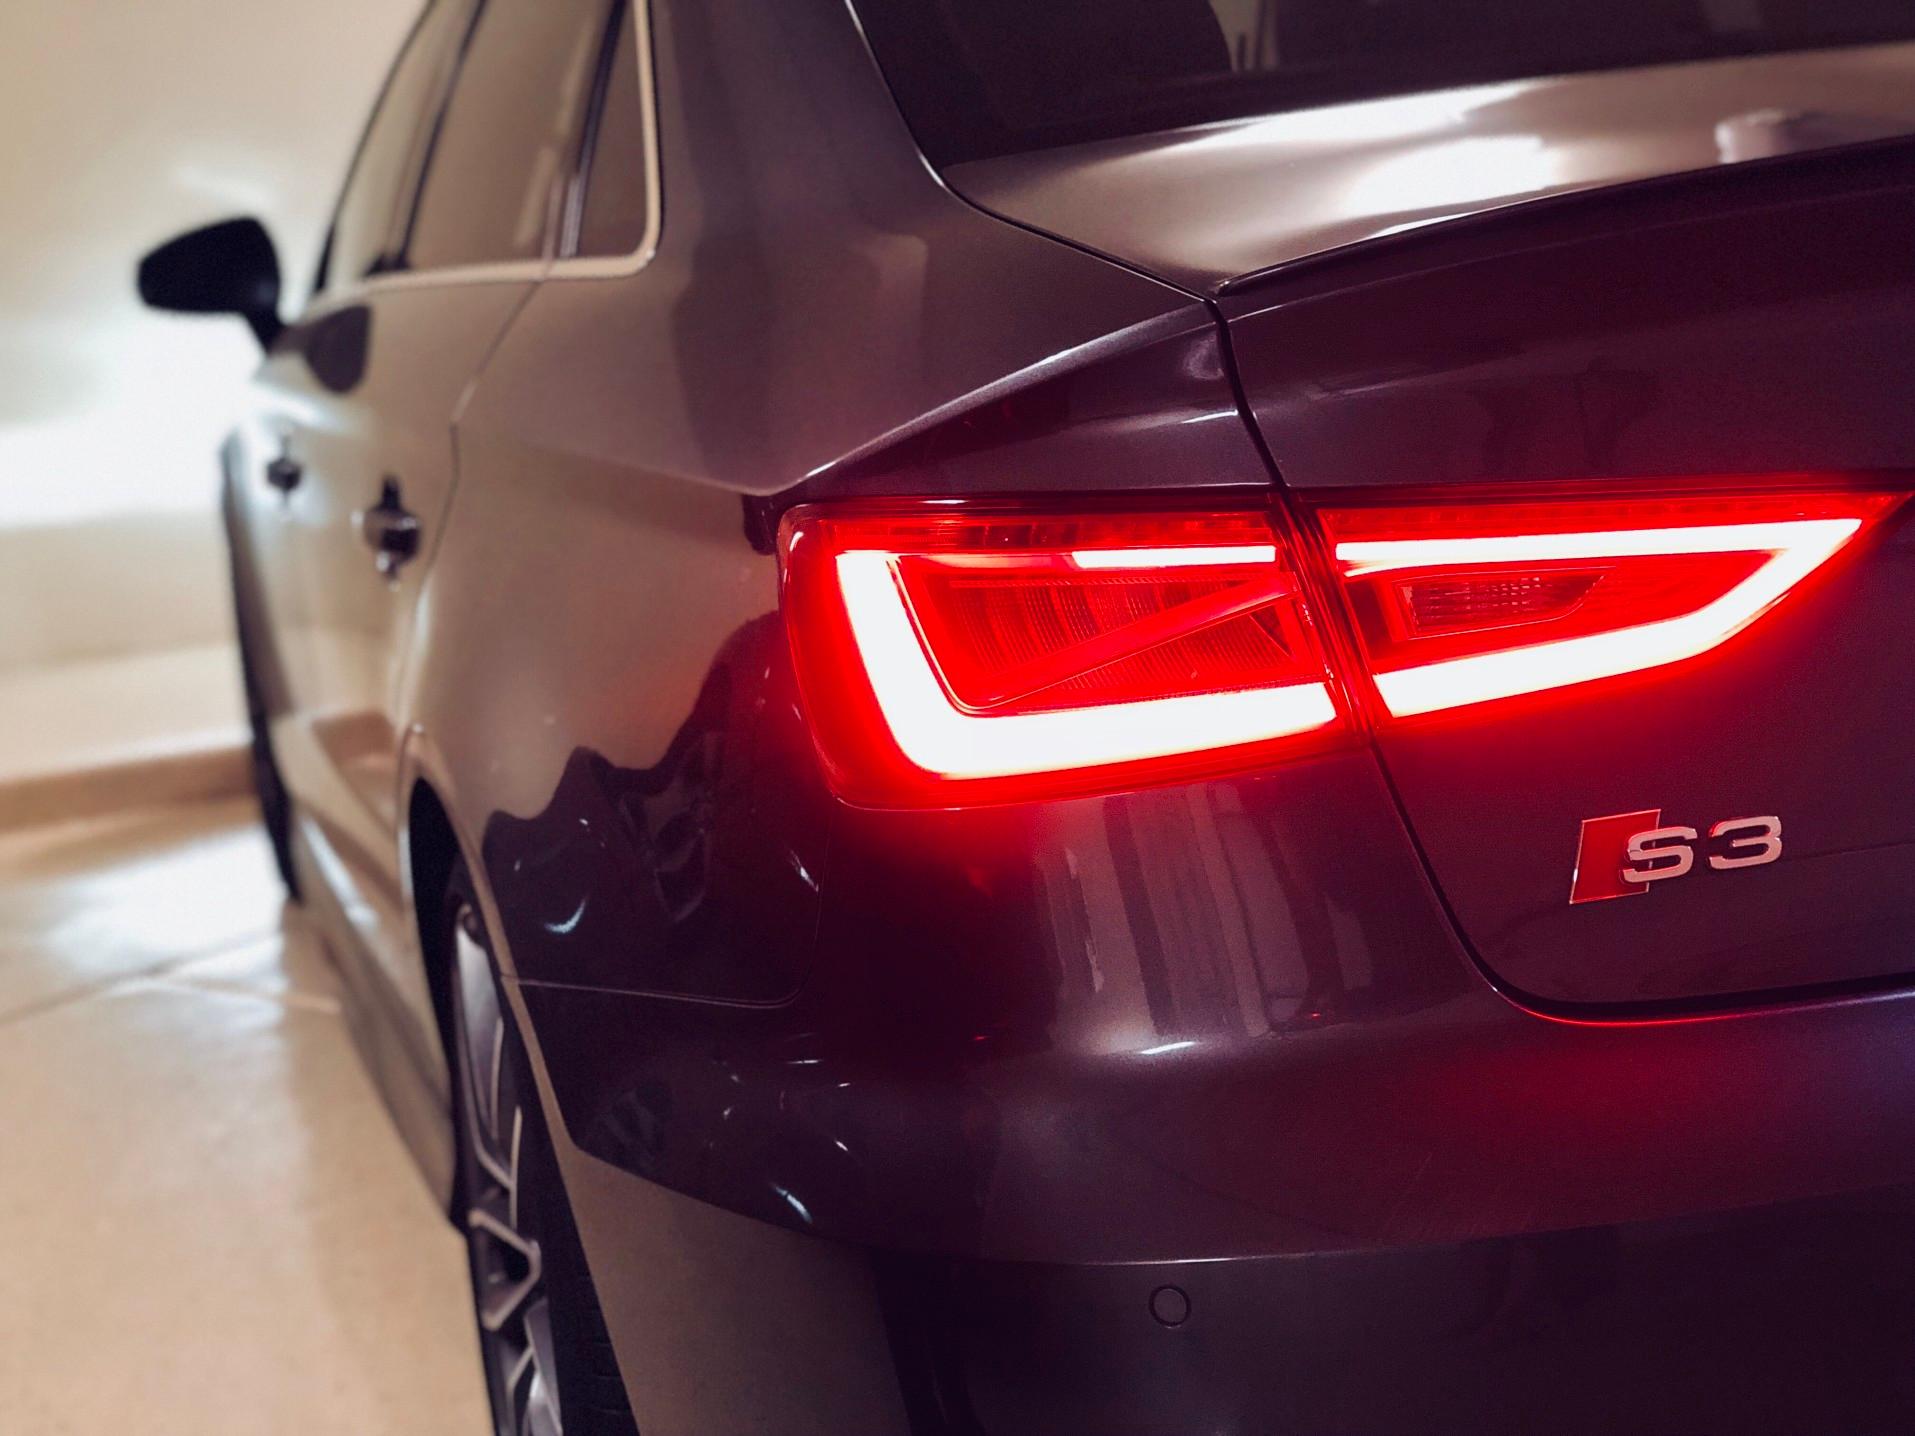 The Audi S3 is one of the fastest cars under 50K. 